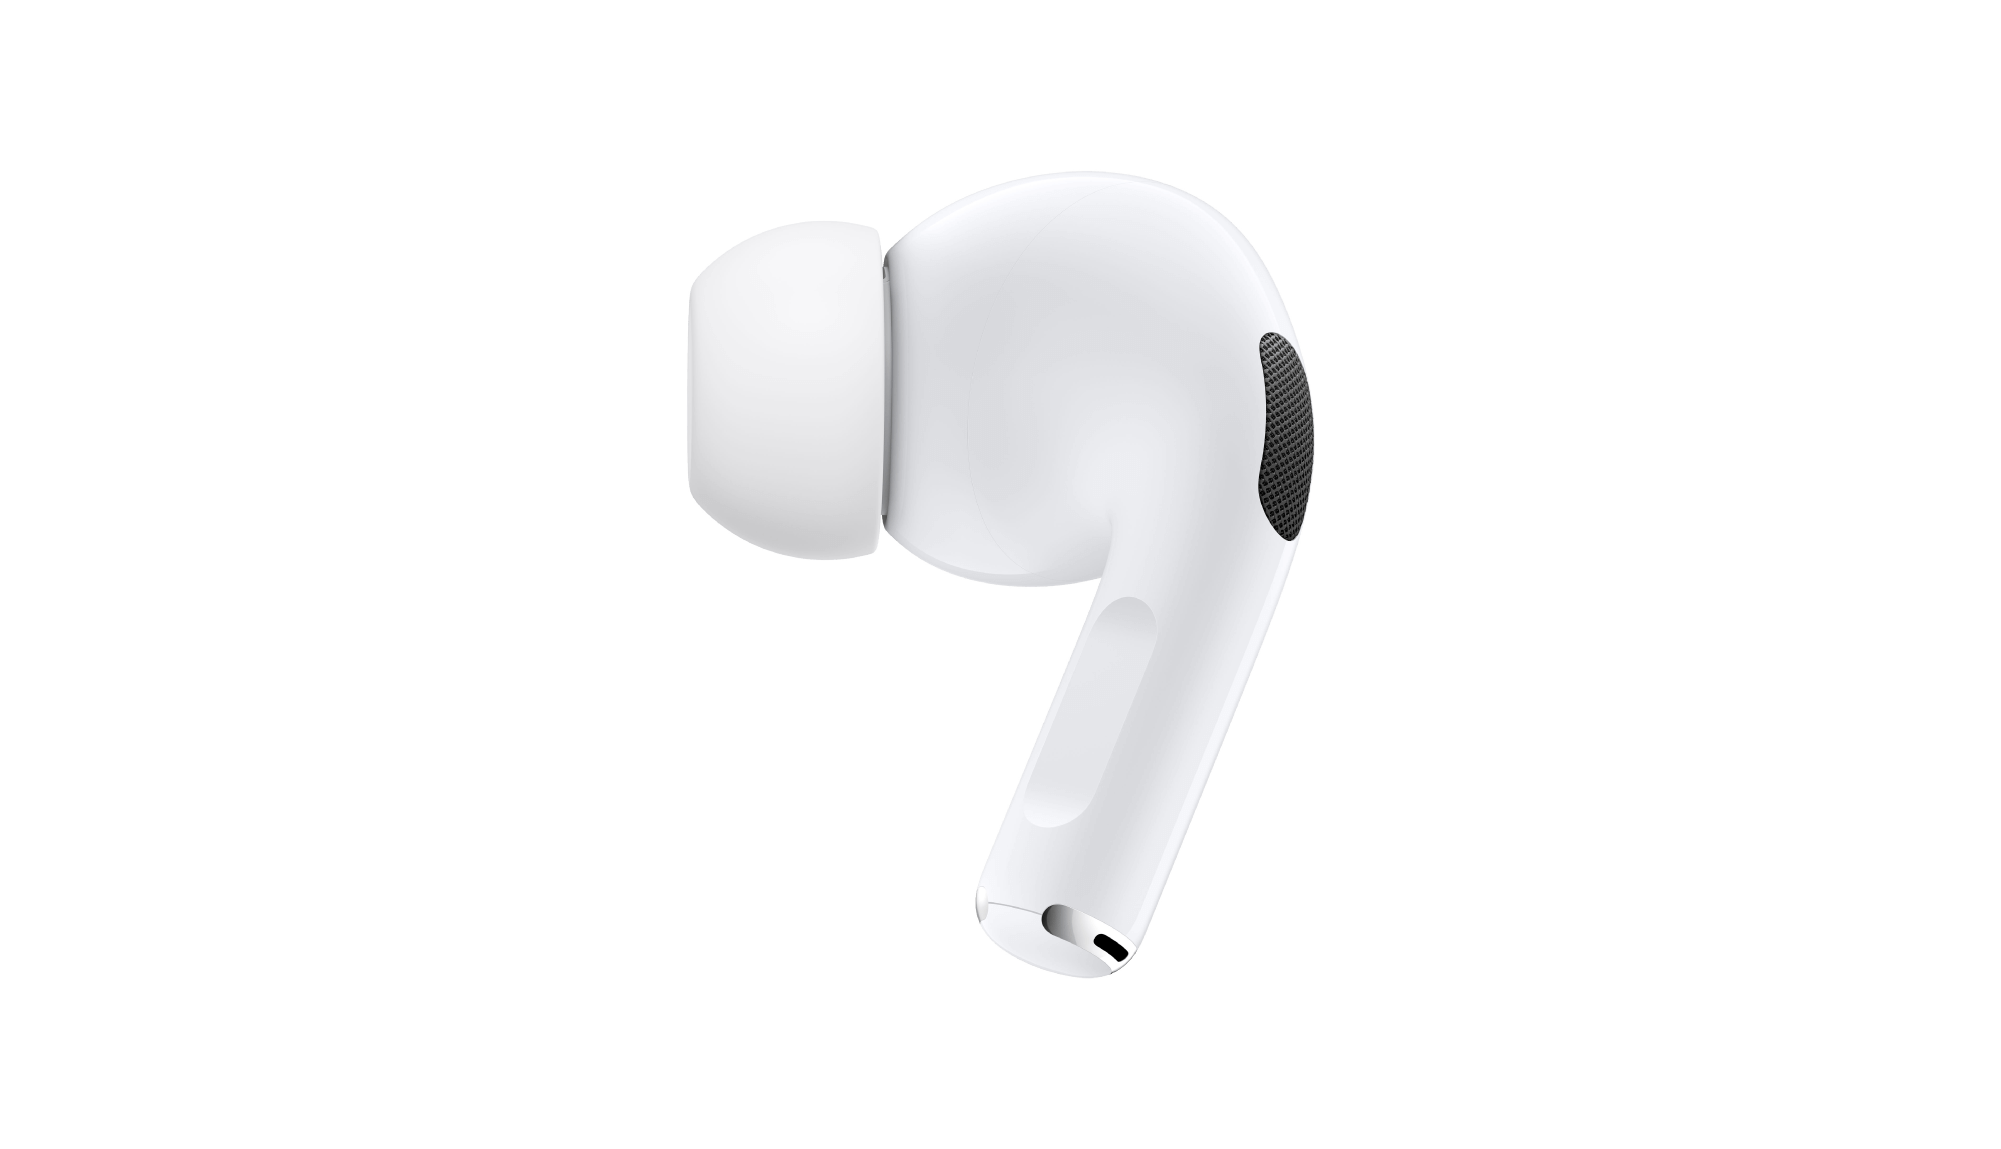 AIRPODS Pro 2nd Generation. A2190 AIRPODS. Беспроводные наушники Apple AIRPODS Pro 2. Левый наушник Apple AIRPODS Pro. Почему левый наушник airpods